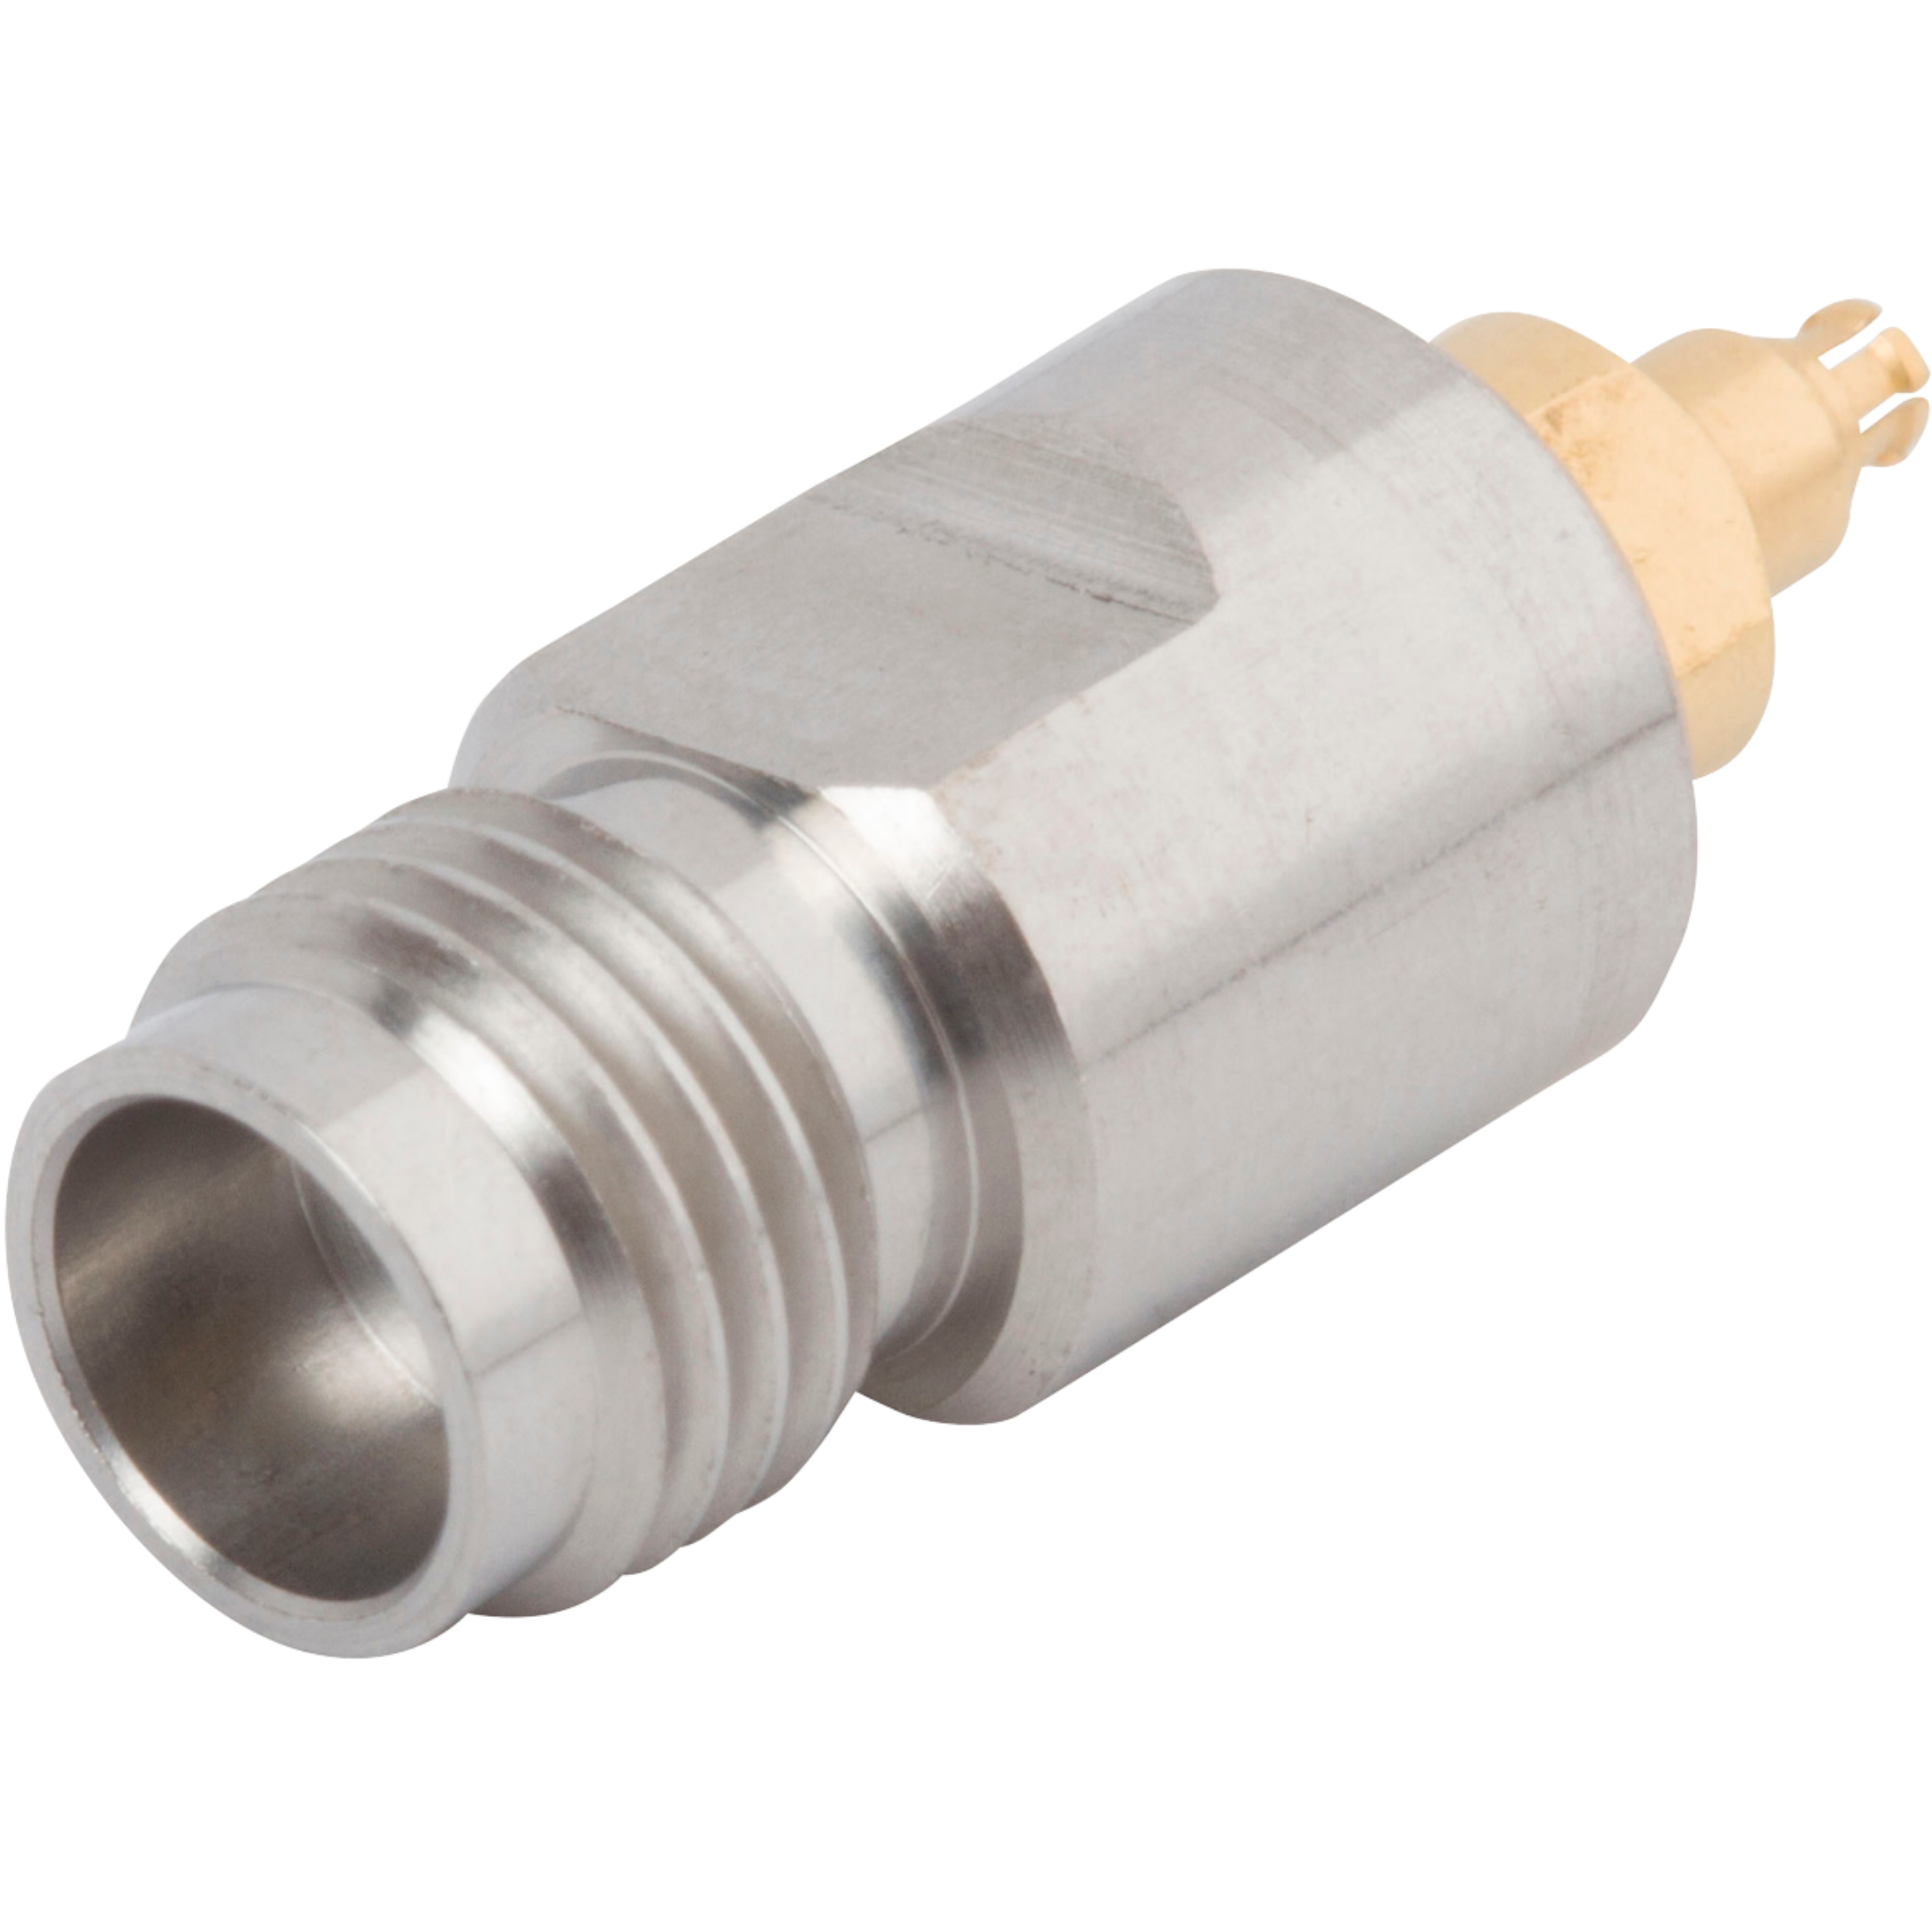 SMPS Female to 2.4mm Female Adapter, SF1116-6022